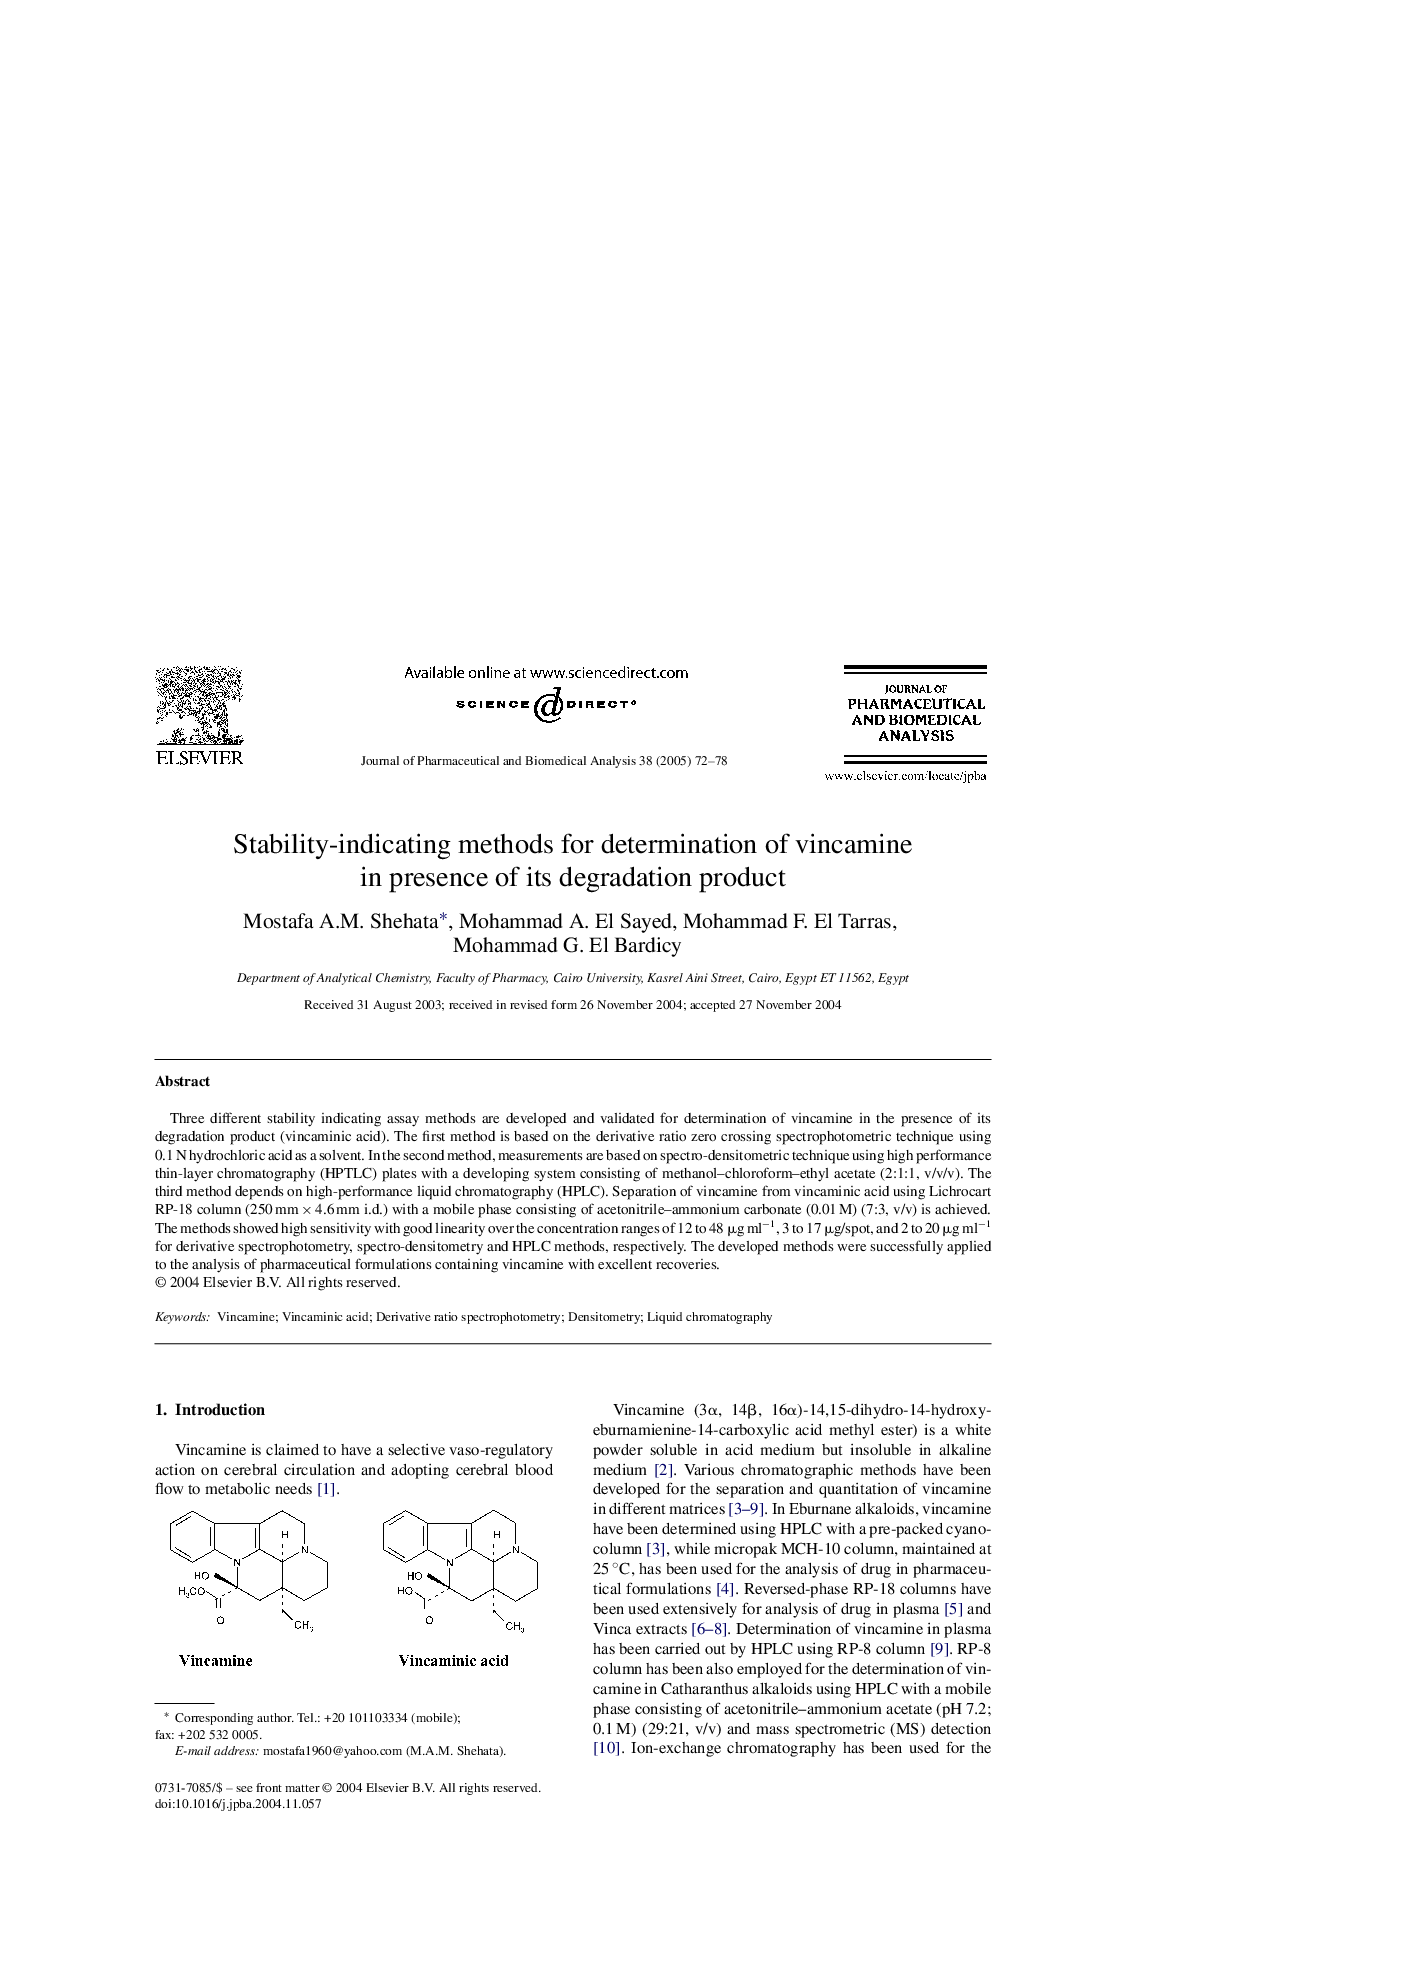 Stability-indicating methods for determination of vincamine in presence of its degradation product